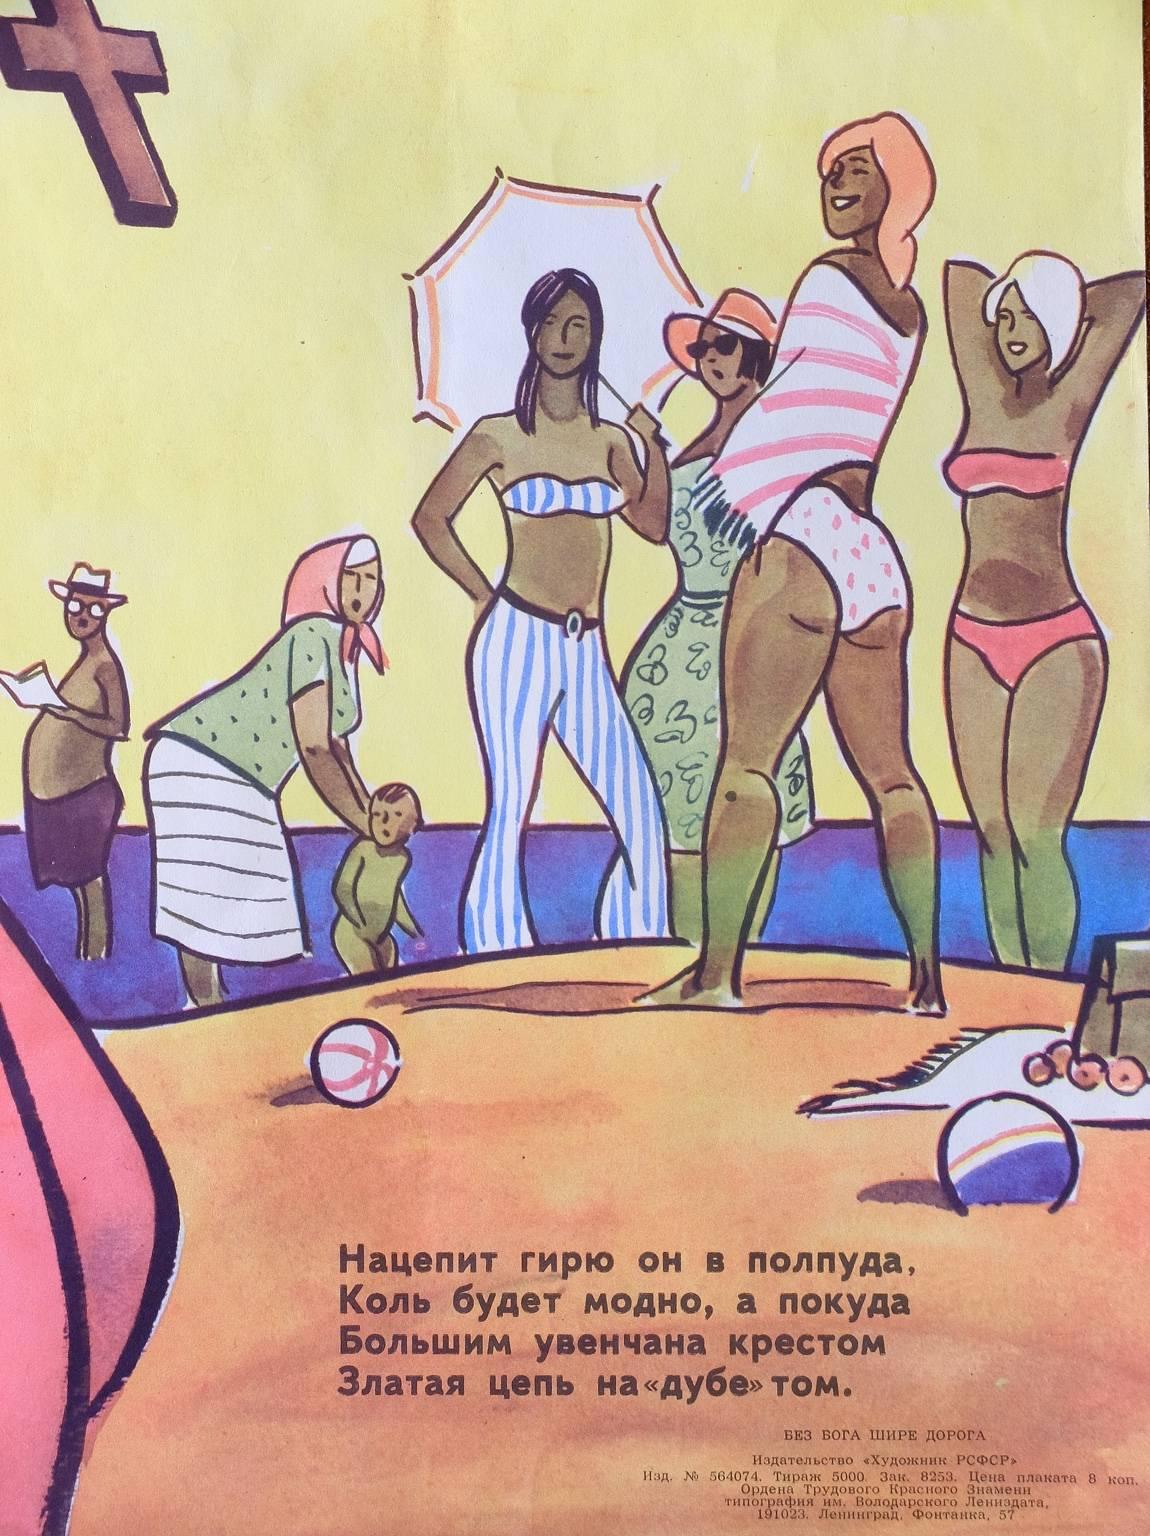 An original Soviet era political poster, one from a collection by the group of satirical artists known as Boevoi Karandash (Fighting Pencil), dated 1975 that deal with the theme of religion. A great graphic image of the period with lots of printed